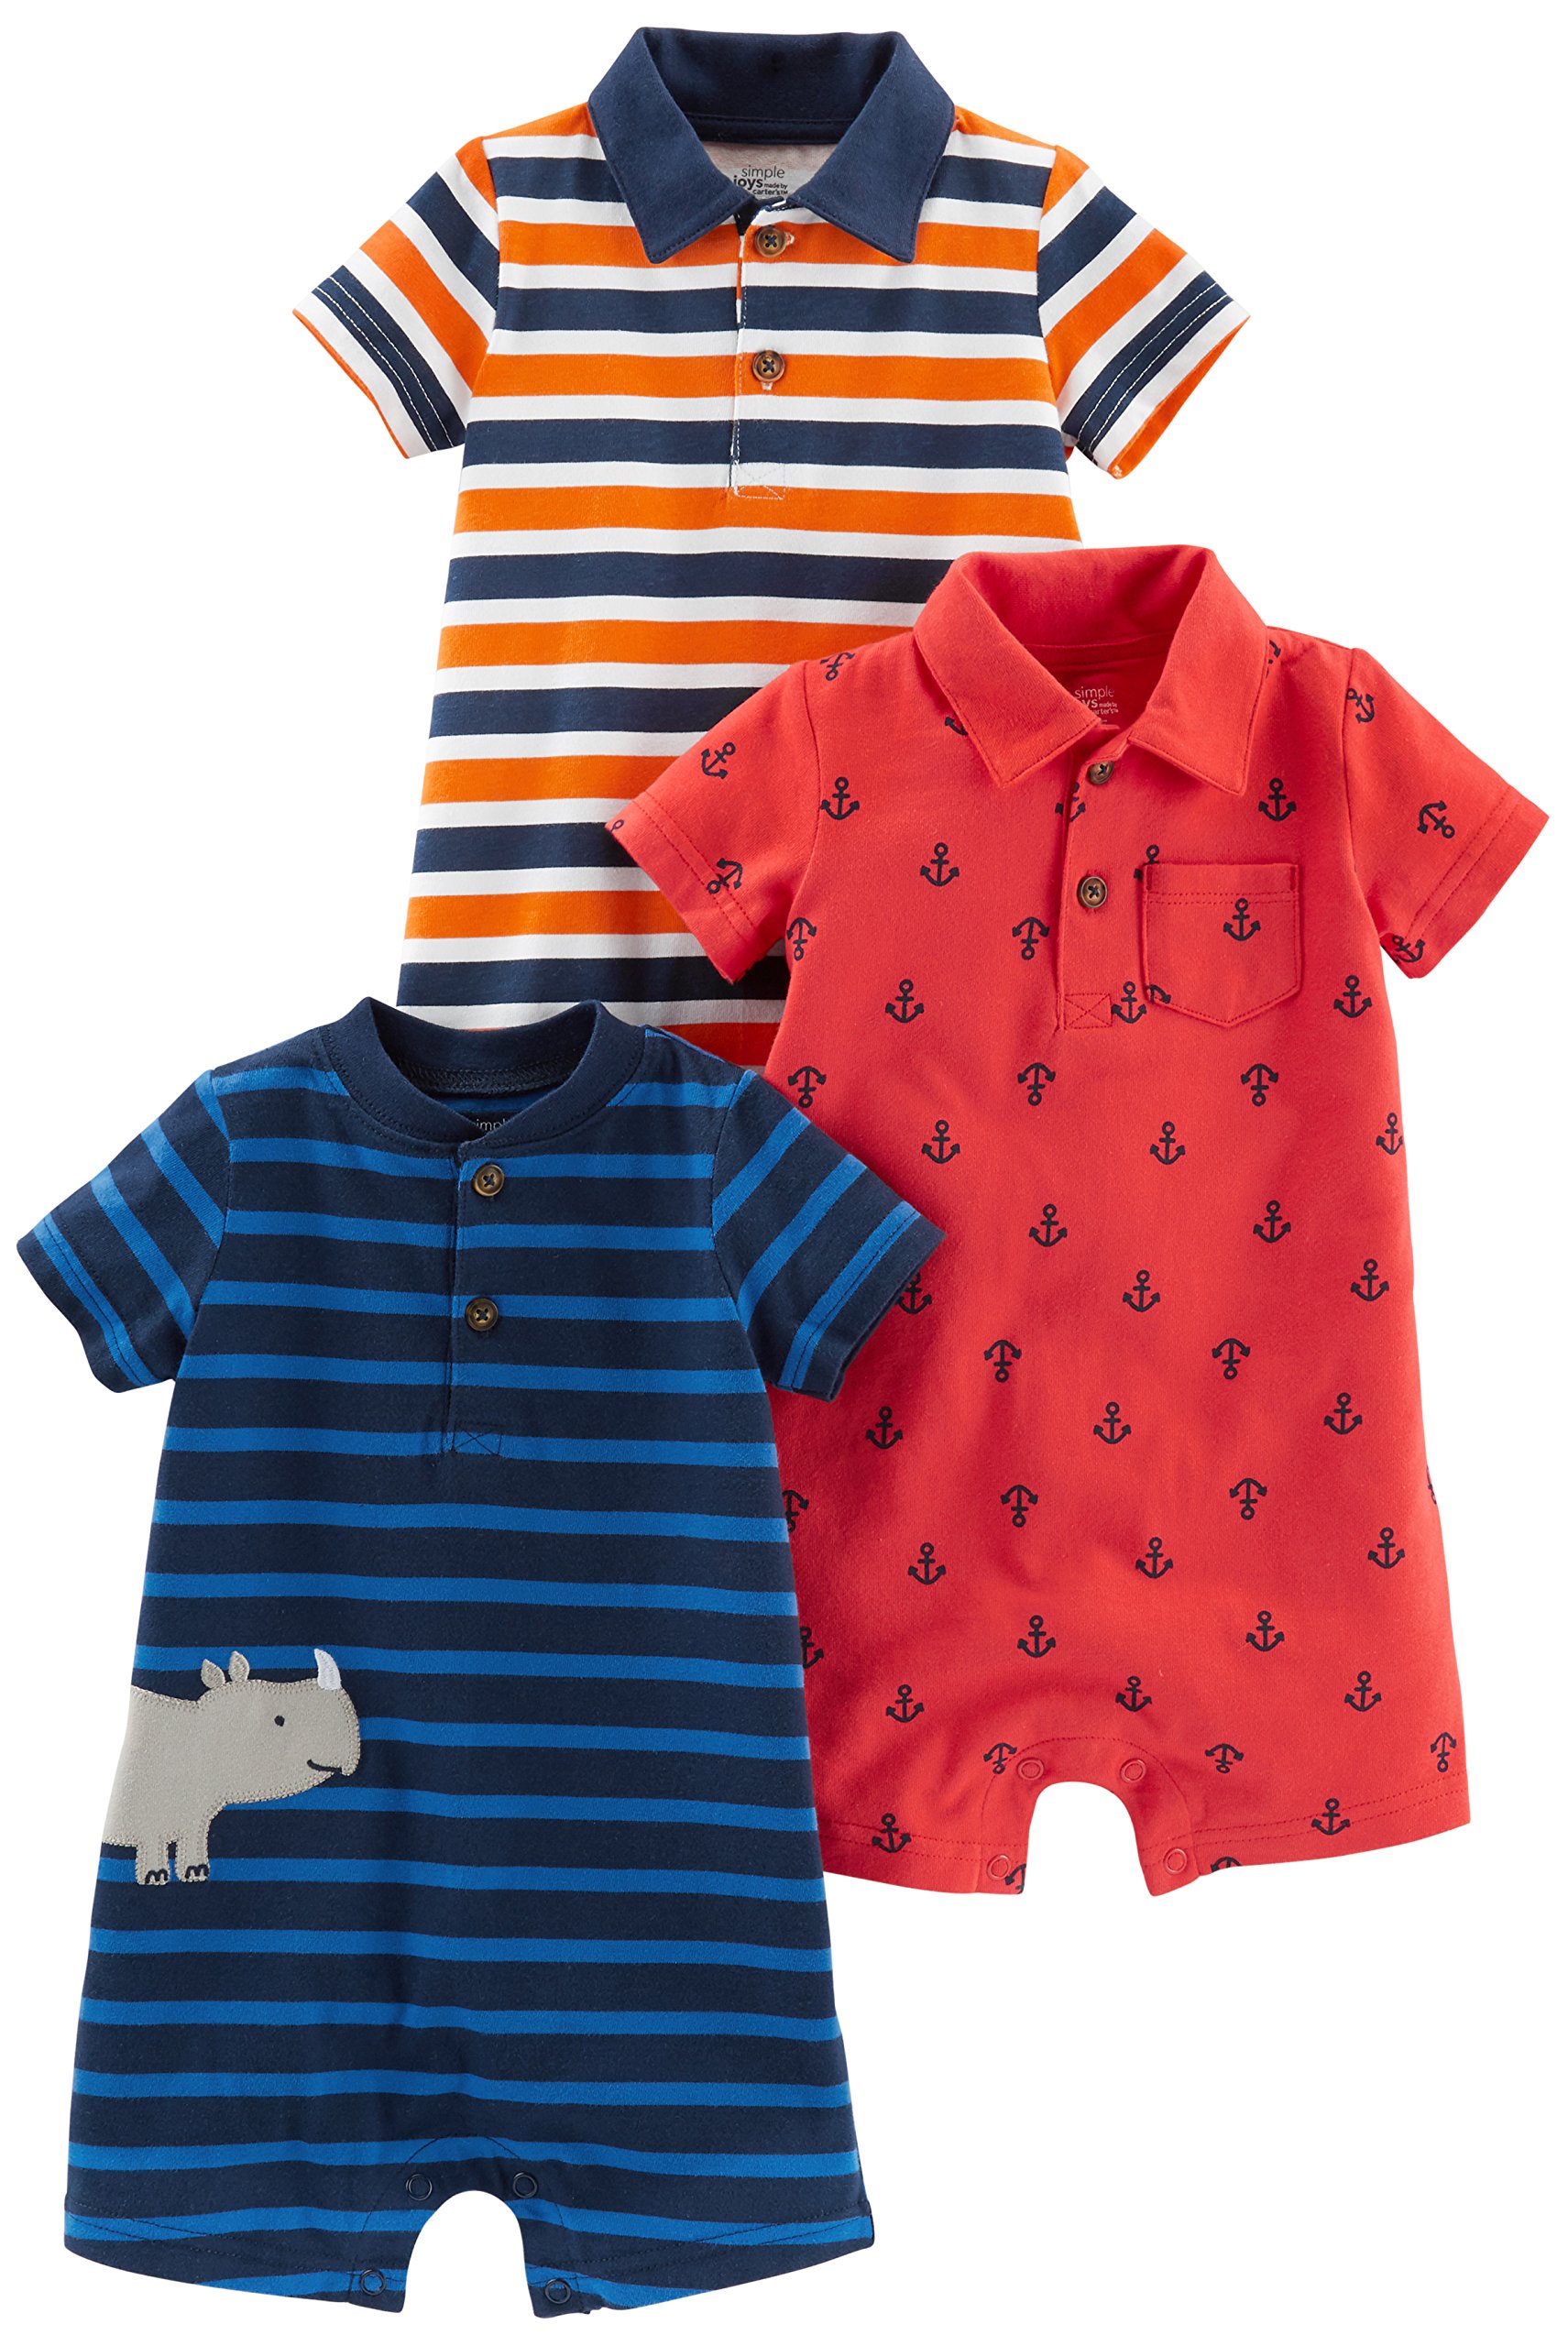 Simple Joys by Carter's Baby Boys' Rompers, Pack of 3